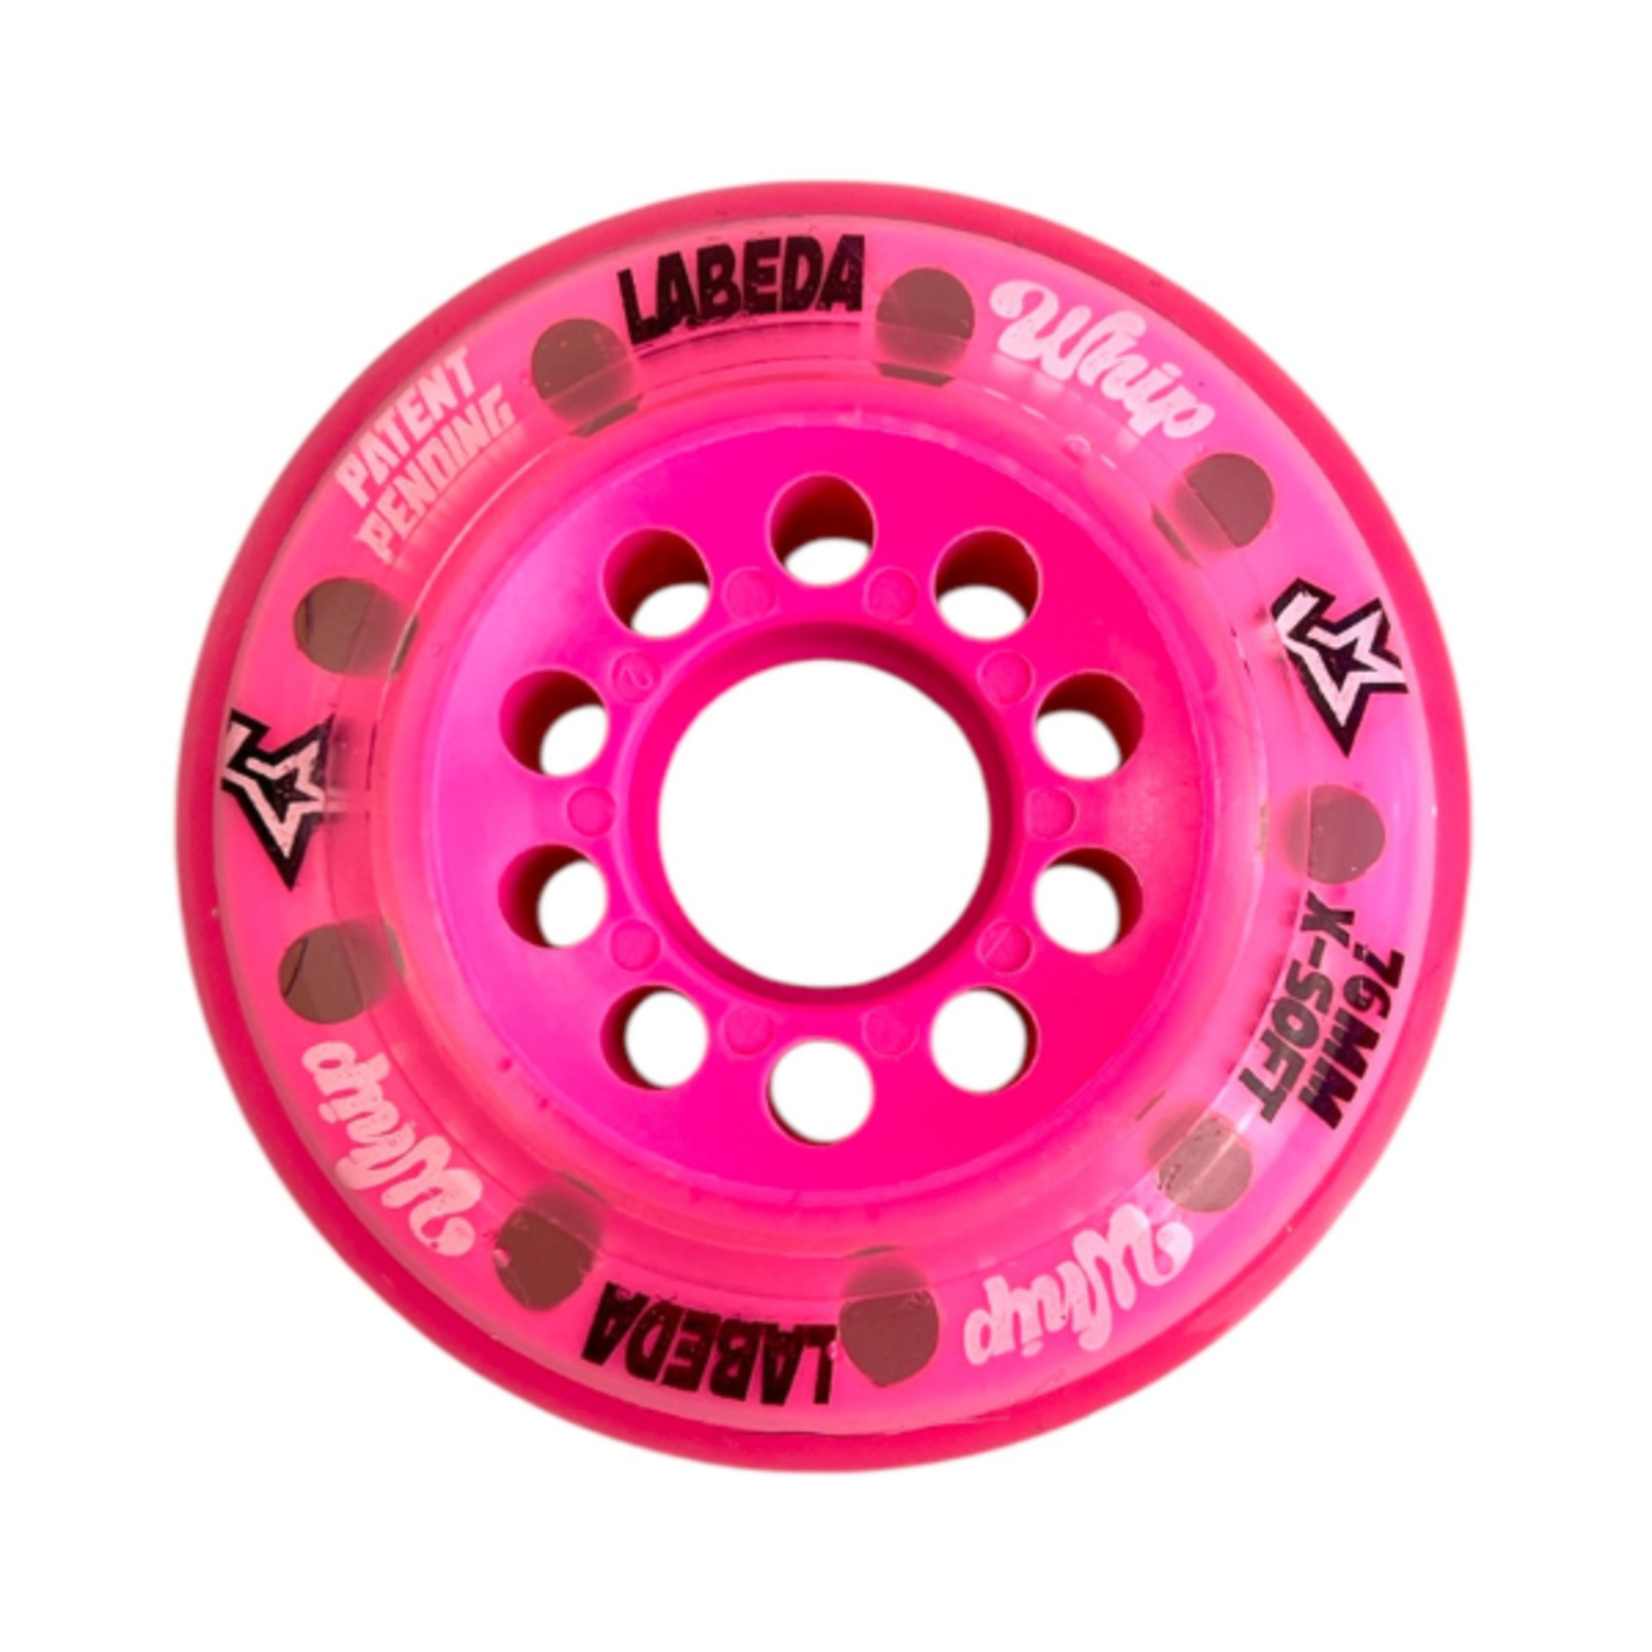 Labeda Labeda Whip Inline Wheel (X-SOFT) PINK